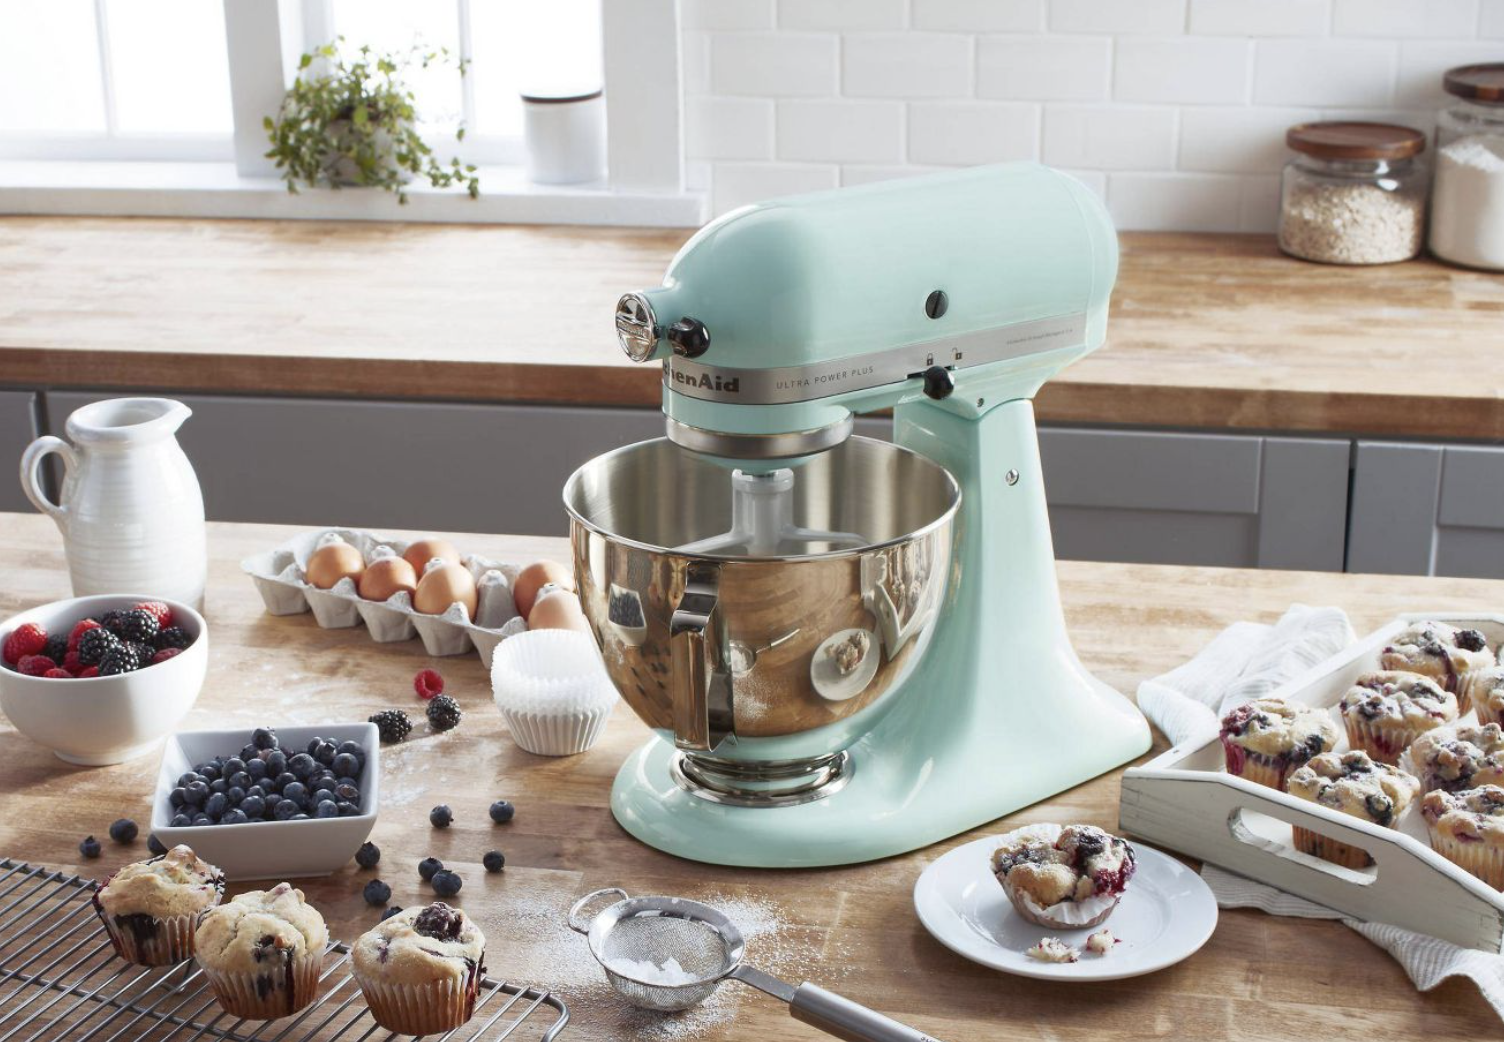 the teal mixer on a table with baked goods around it